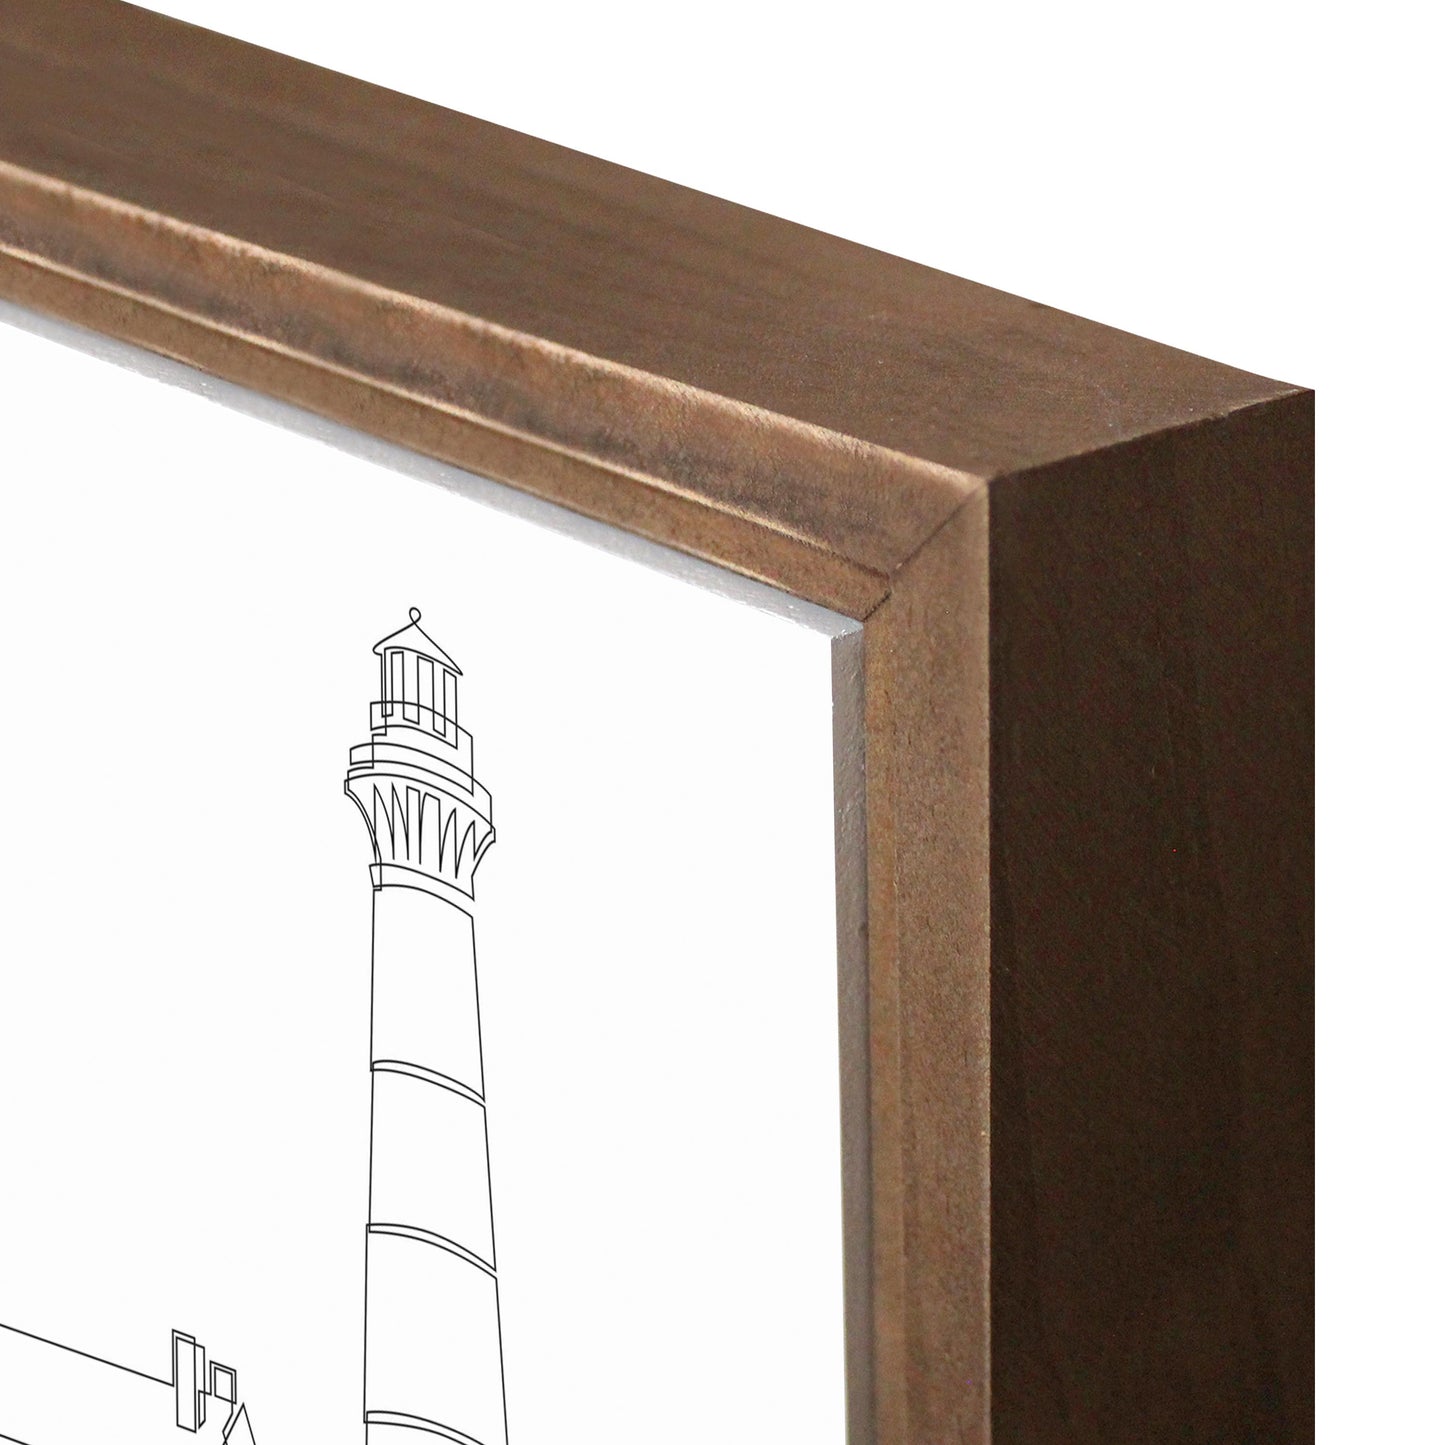 Bodie Island Lighthouse | Wood Sign | Eaches | Min 1